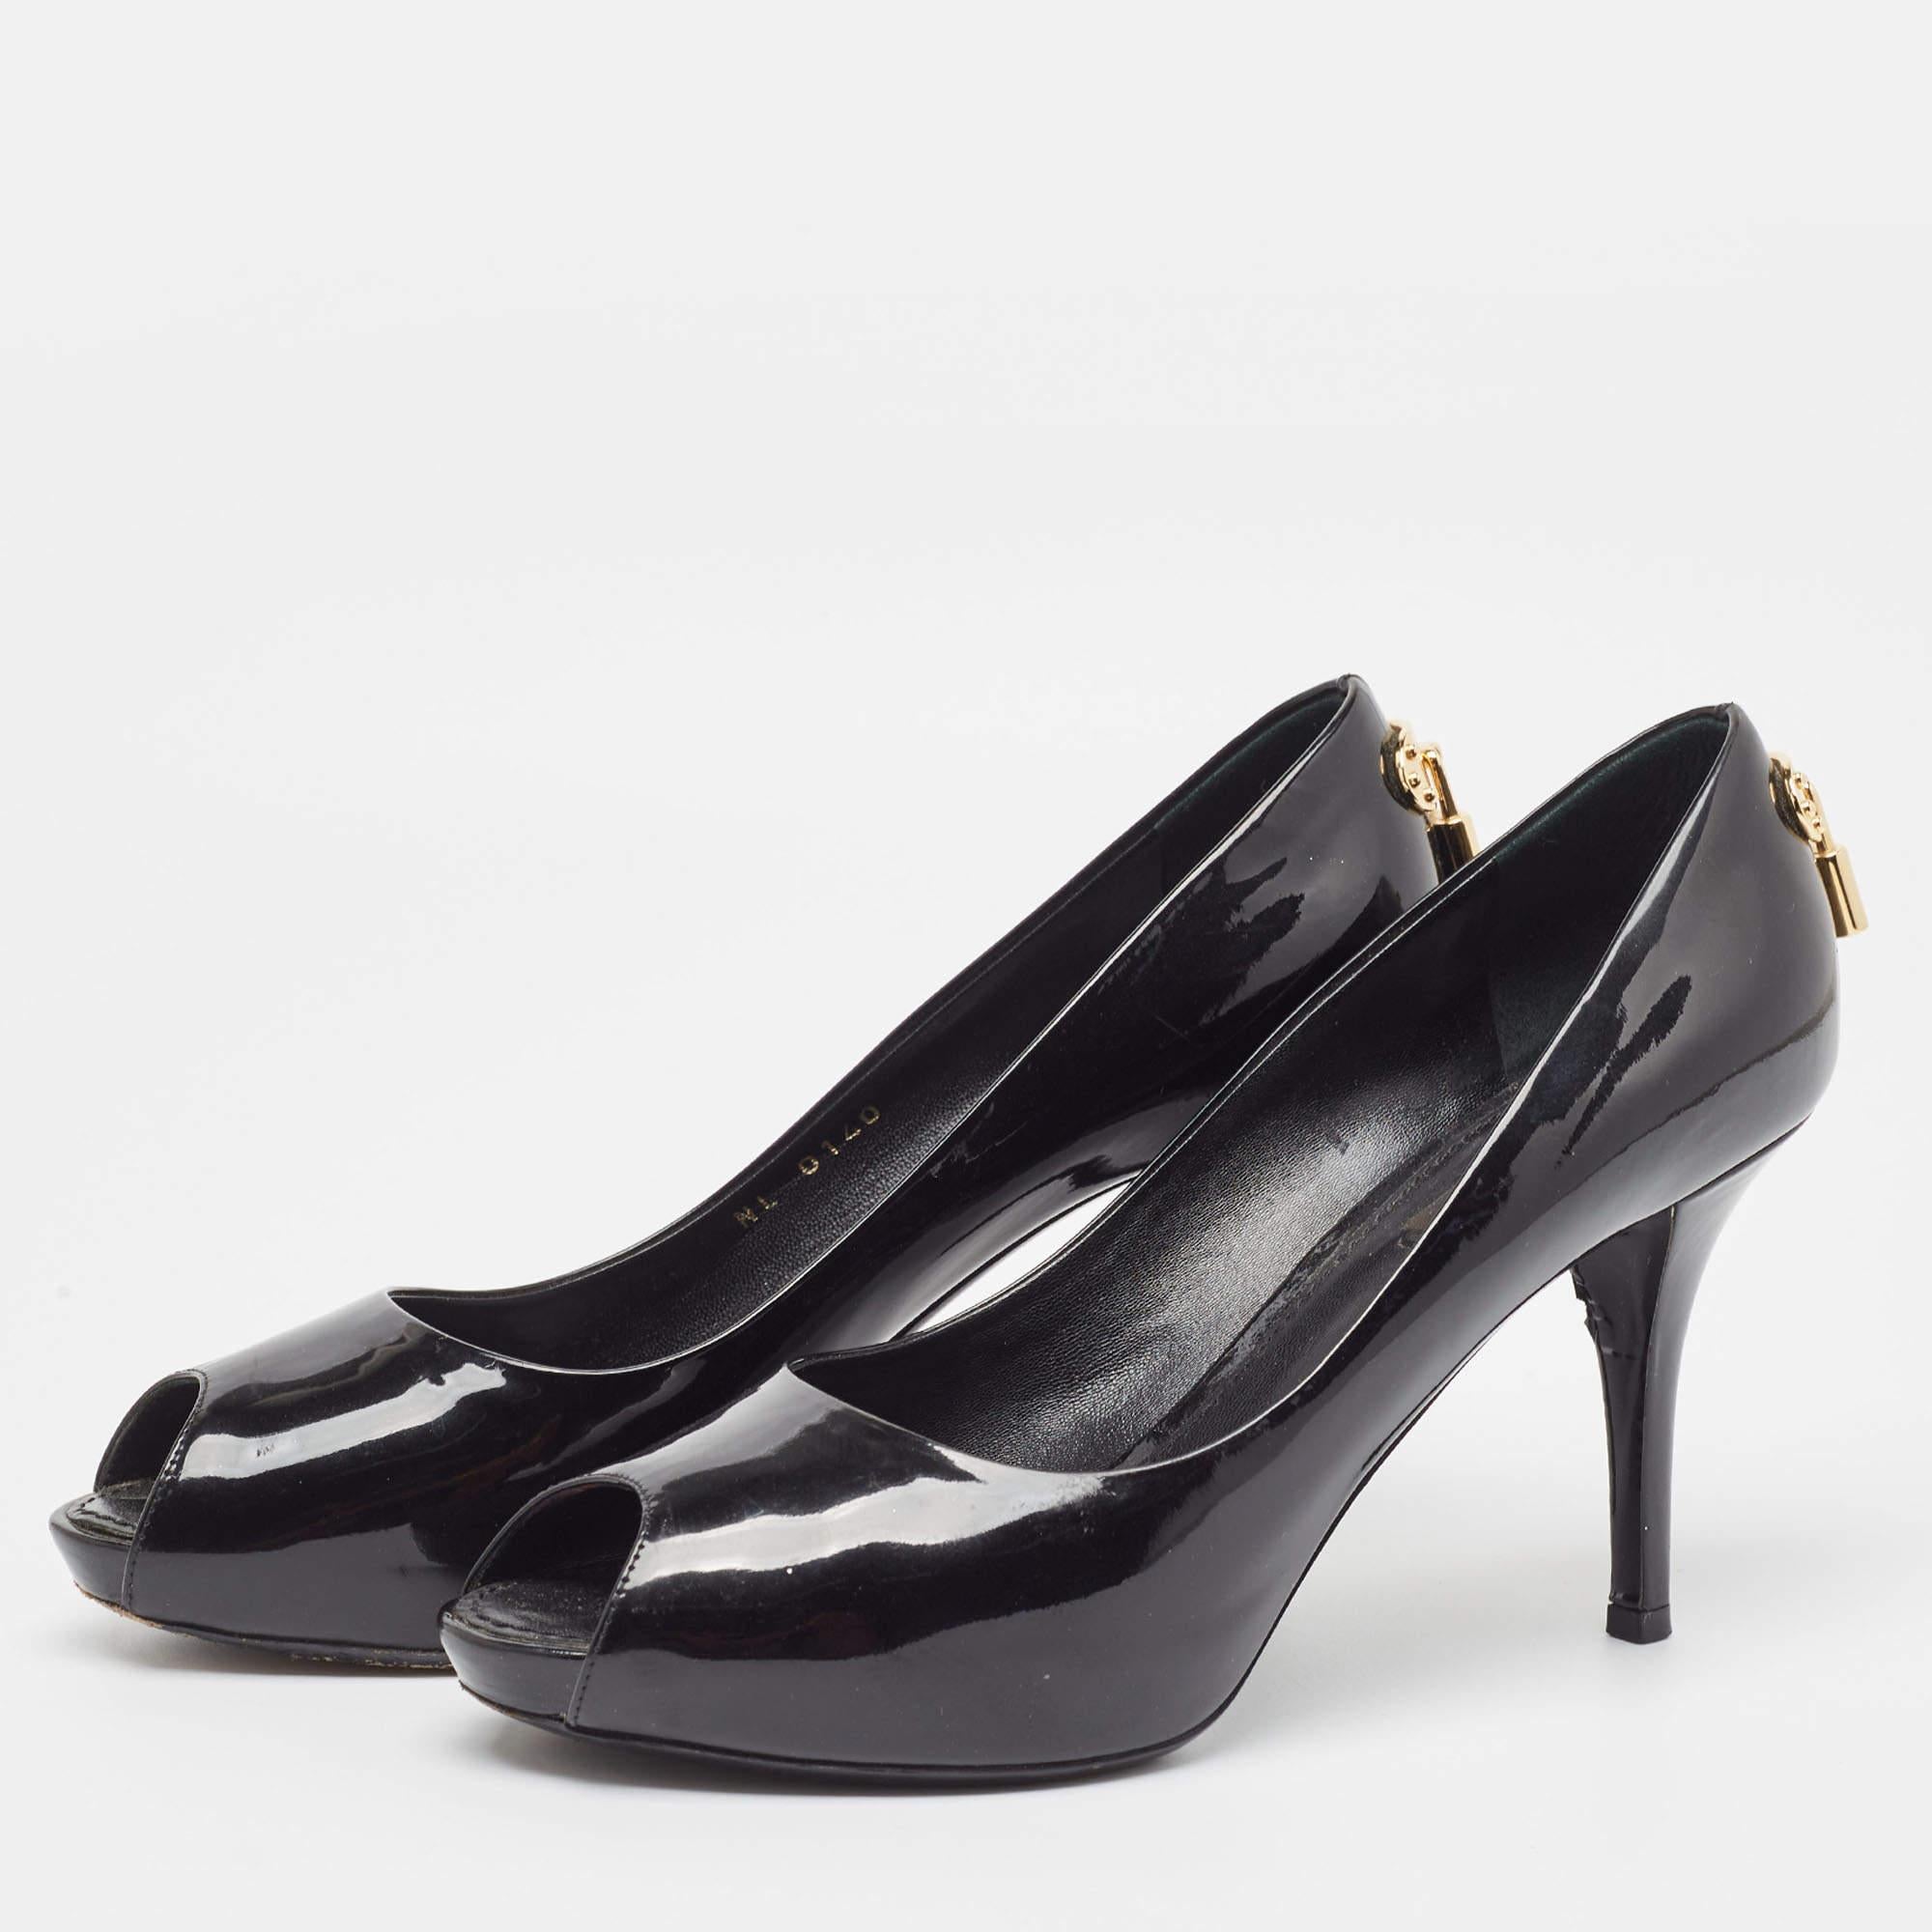 Louis Vuitton Black Patent Leather Oh Really! Pumps Size 38.5 For Sale 2